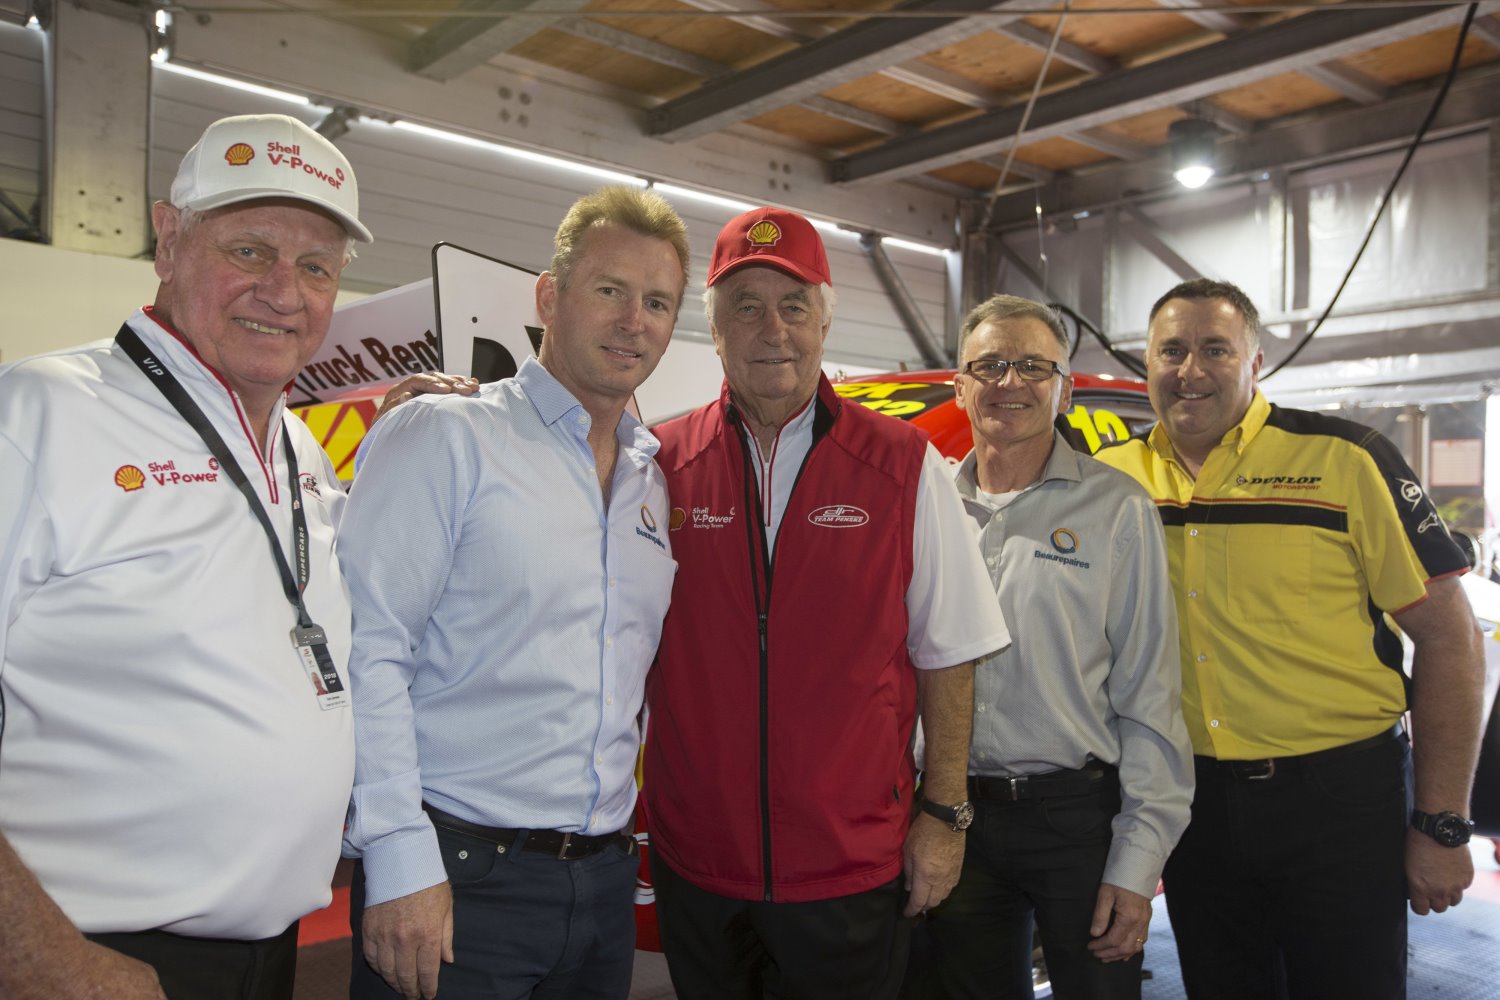 (L to R) - Dick Johnson, Scott Bennett - Director Retail Operations Beaurepaires, Roger Penske, Rob Lewis - Vice President Retail of Goodyear & Dunlop Tyres, Kevin Fitzsimmons - Dunlop Motorsport Operations Manager.